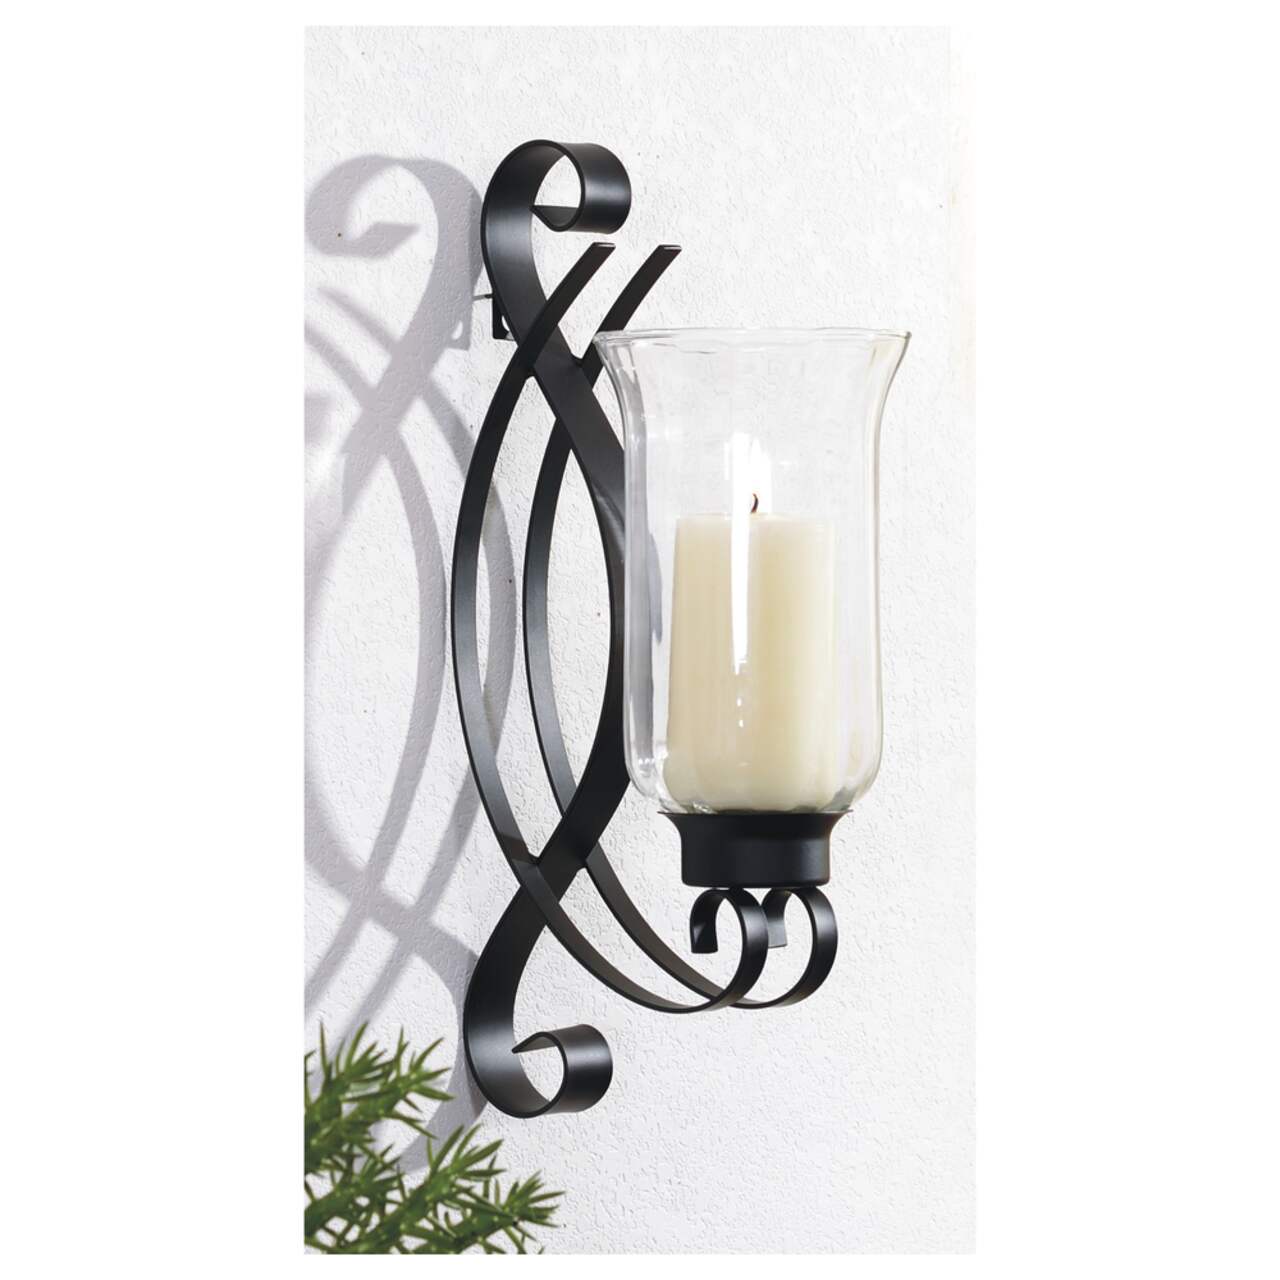 Elite Burners, Candle Accessories